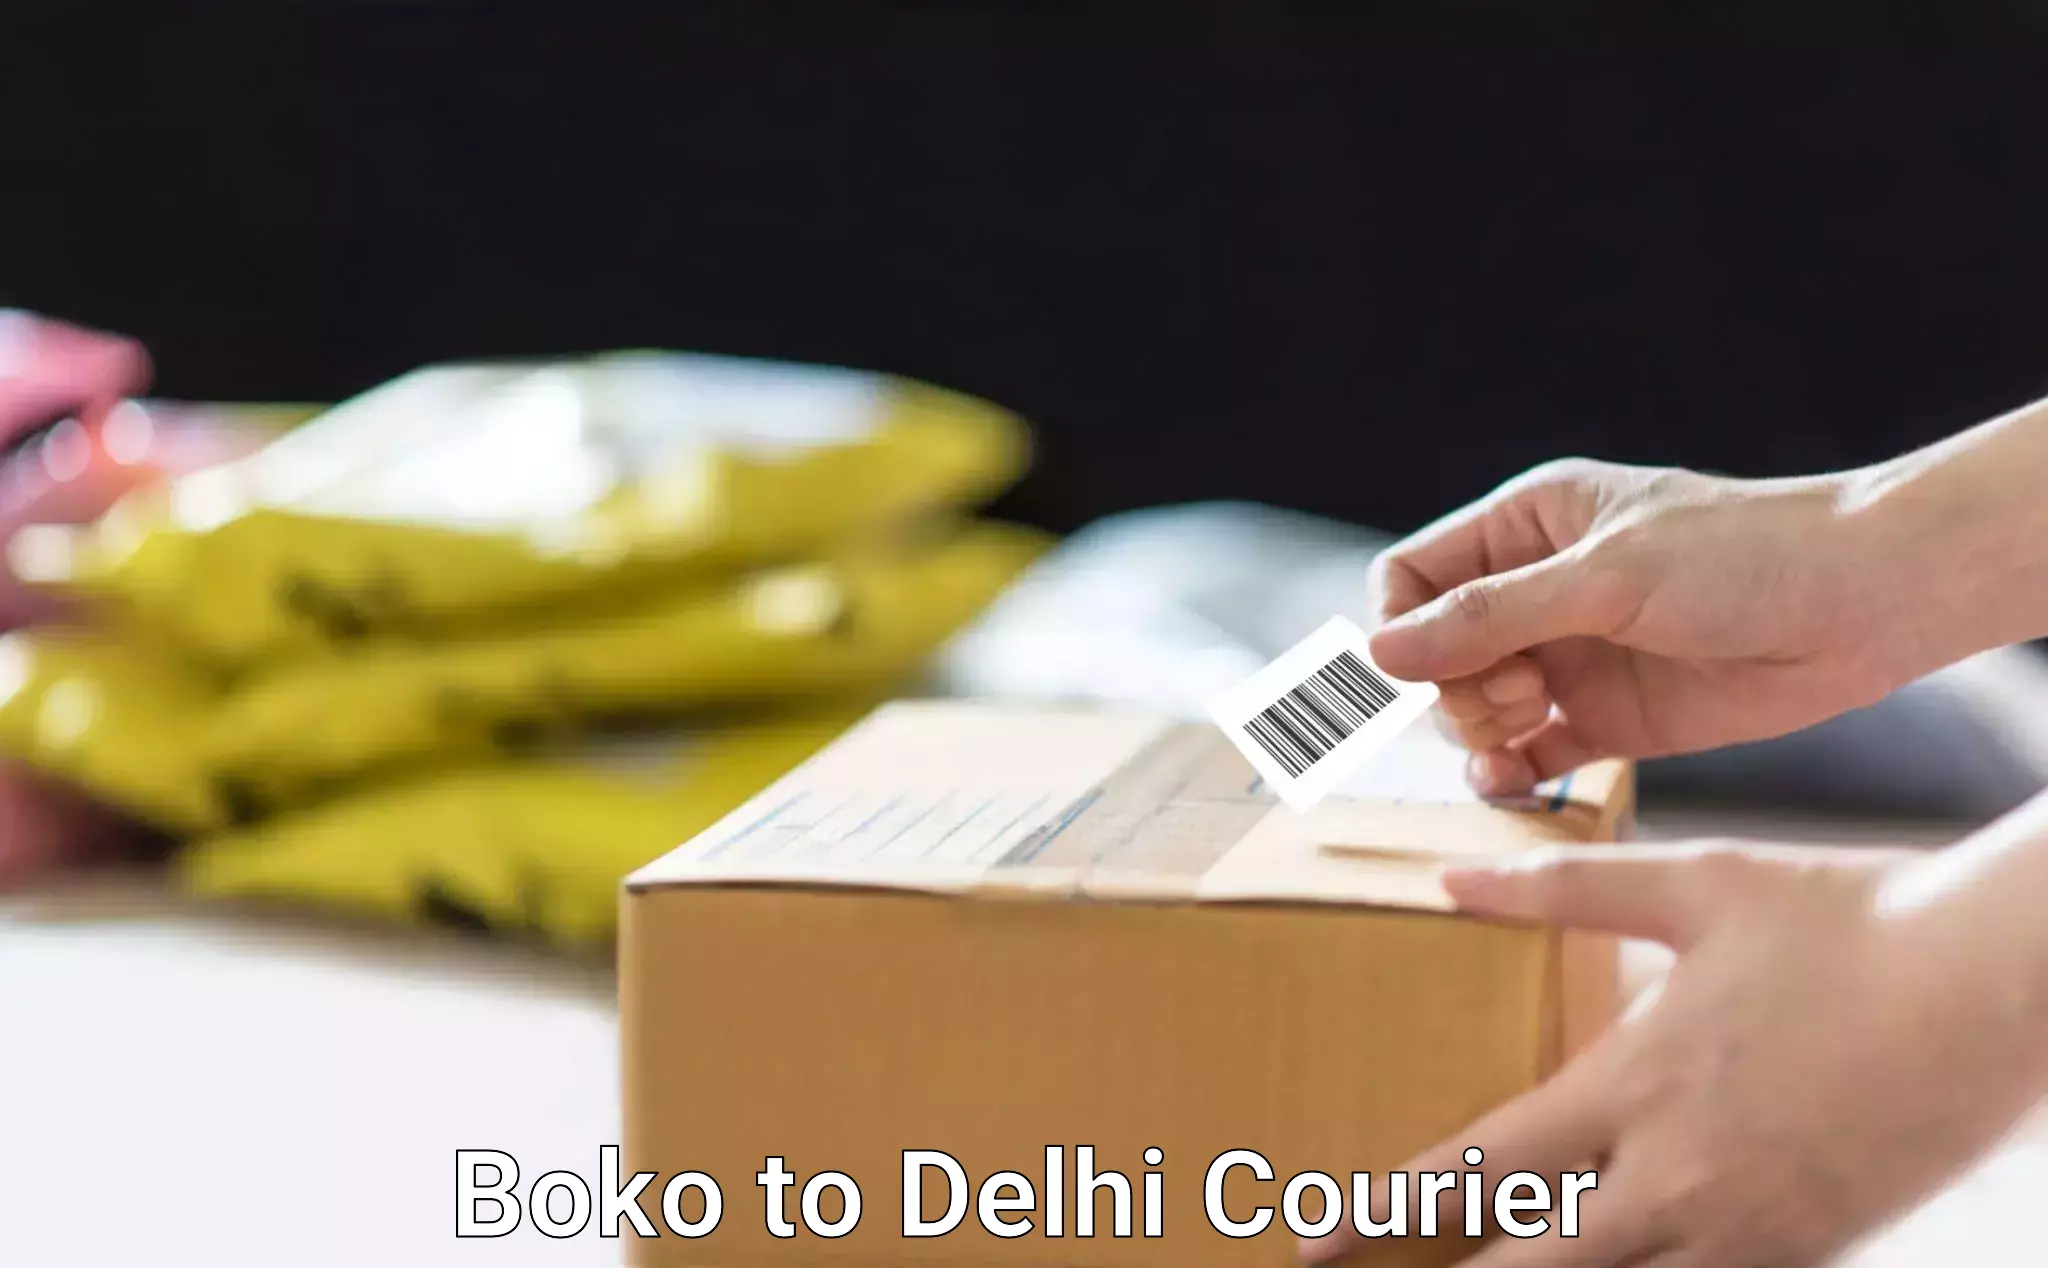 Reliable delivery network Boko to Delhi